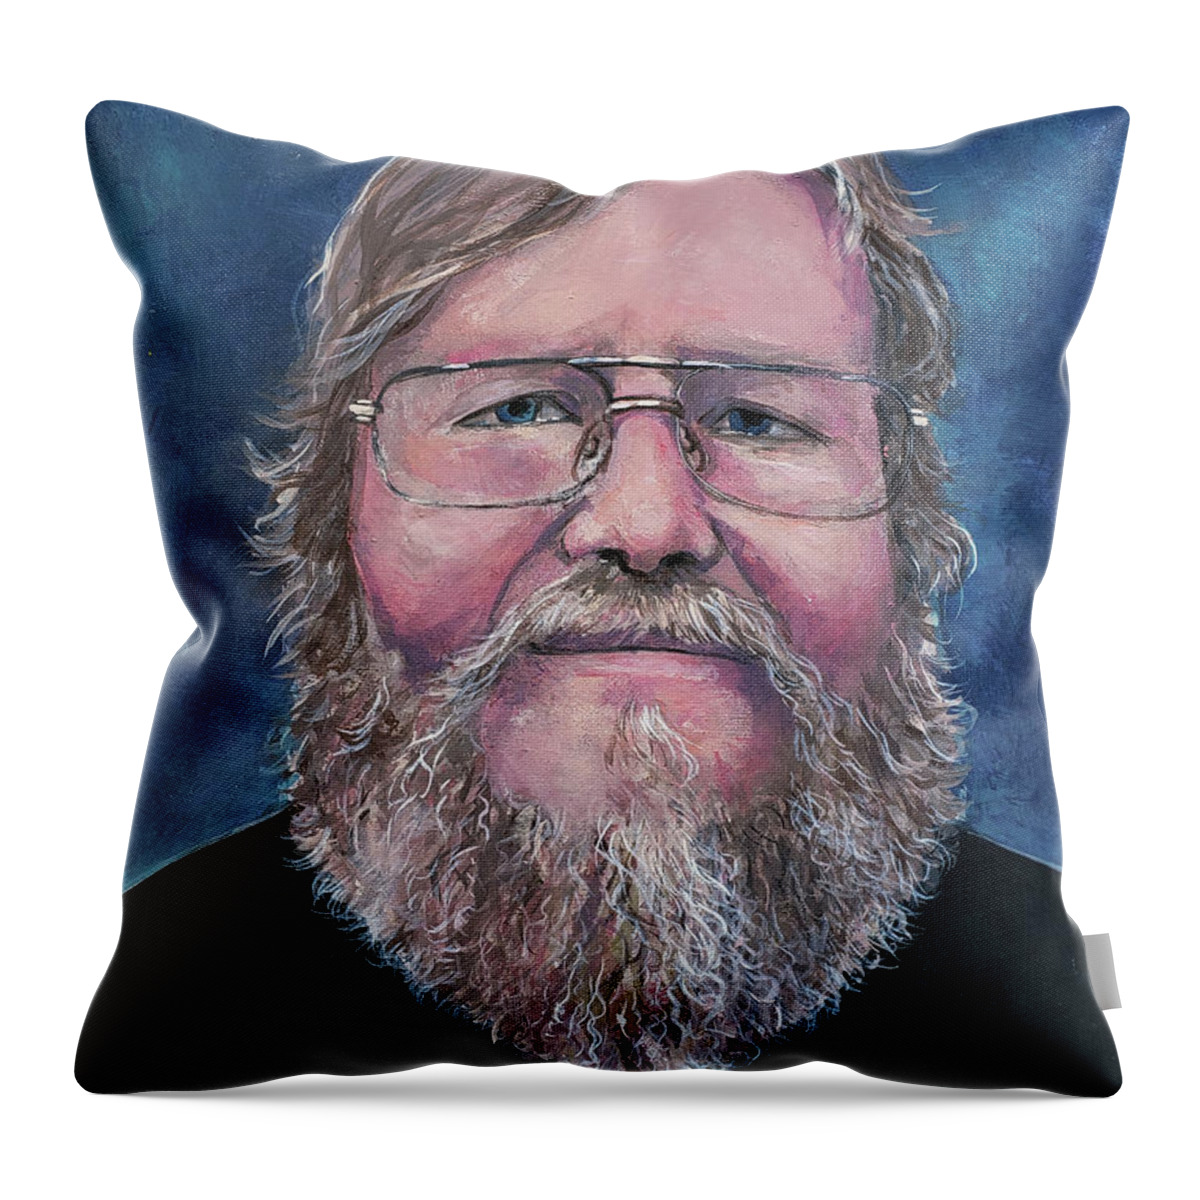 Tom Carlton Throw Pillow featuring the painting Self Portrait 2019 by Tom Carlton